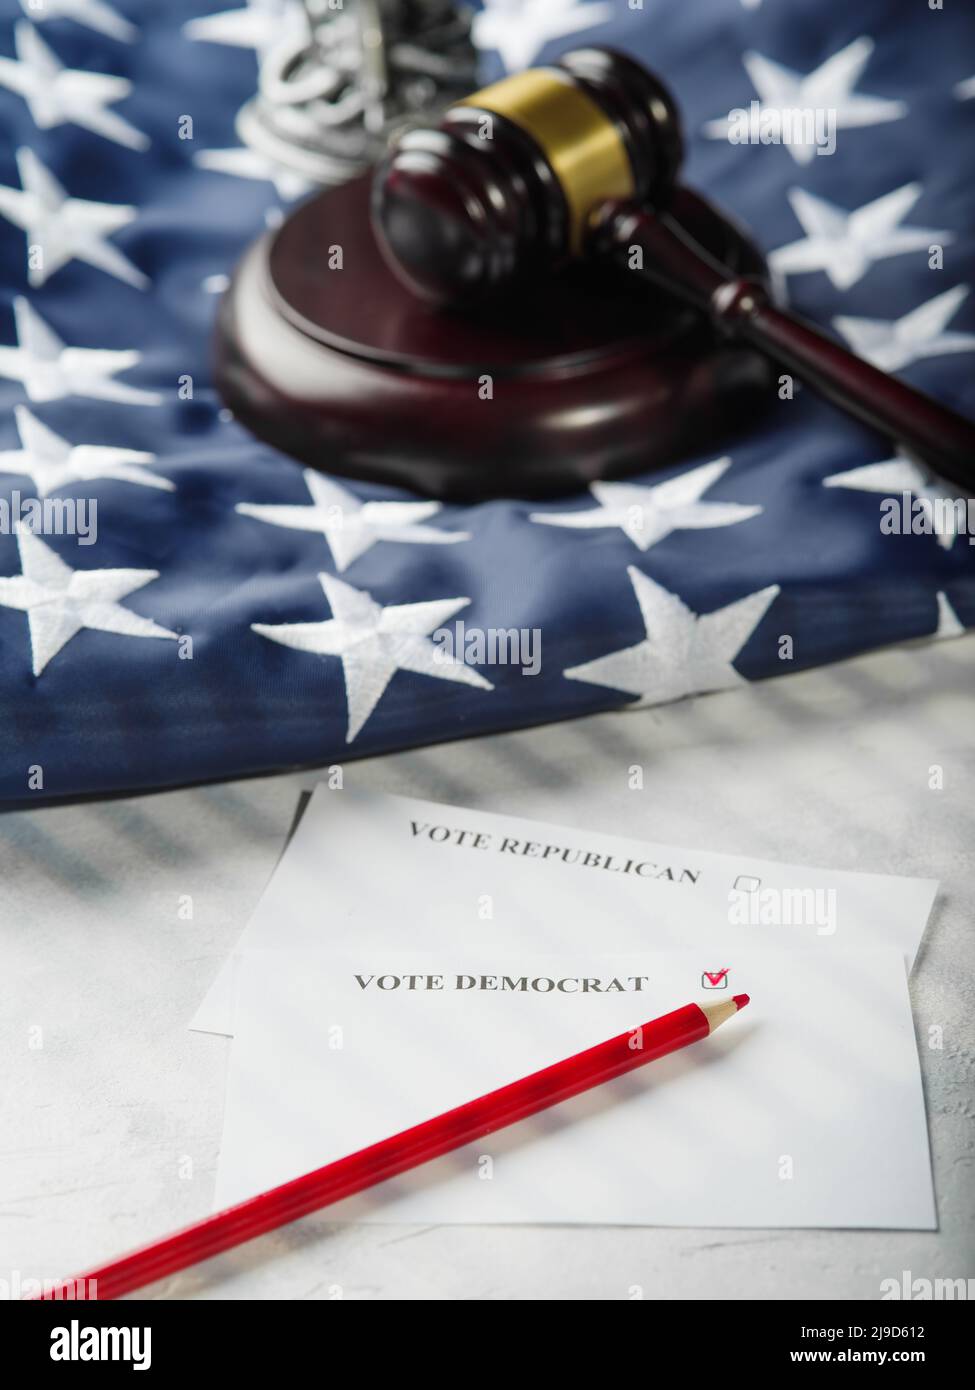 An American flag, a judge's gavel, and a leaflet calling for votes for Republicans and Democrats. The right to choose, freedom of choice, the constitu Stock Photo